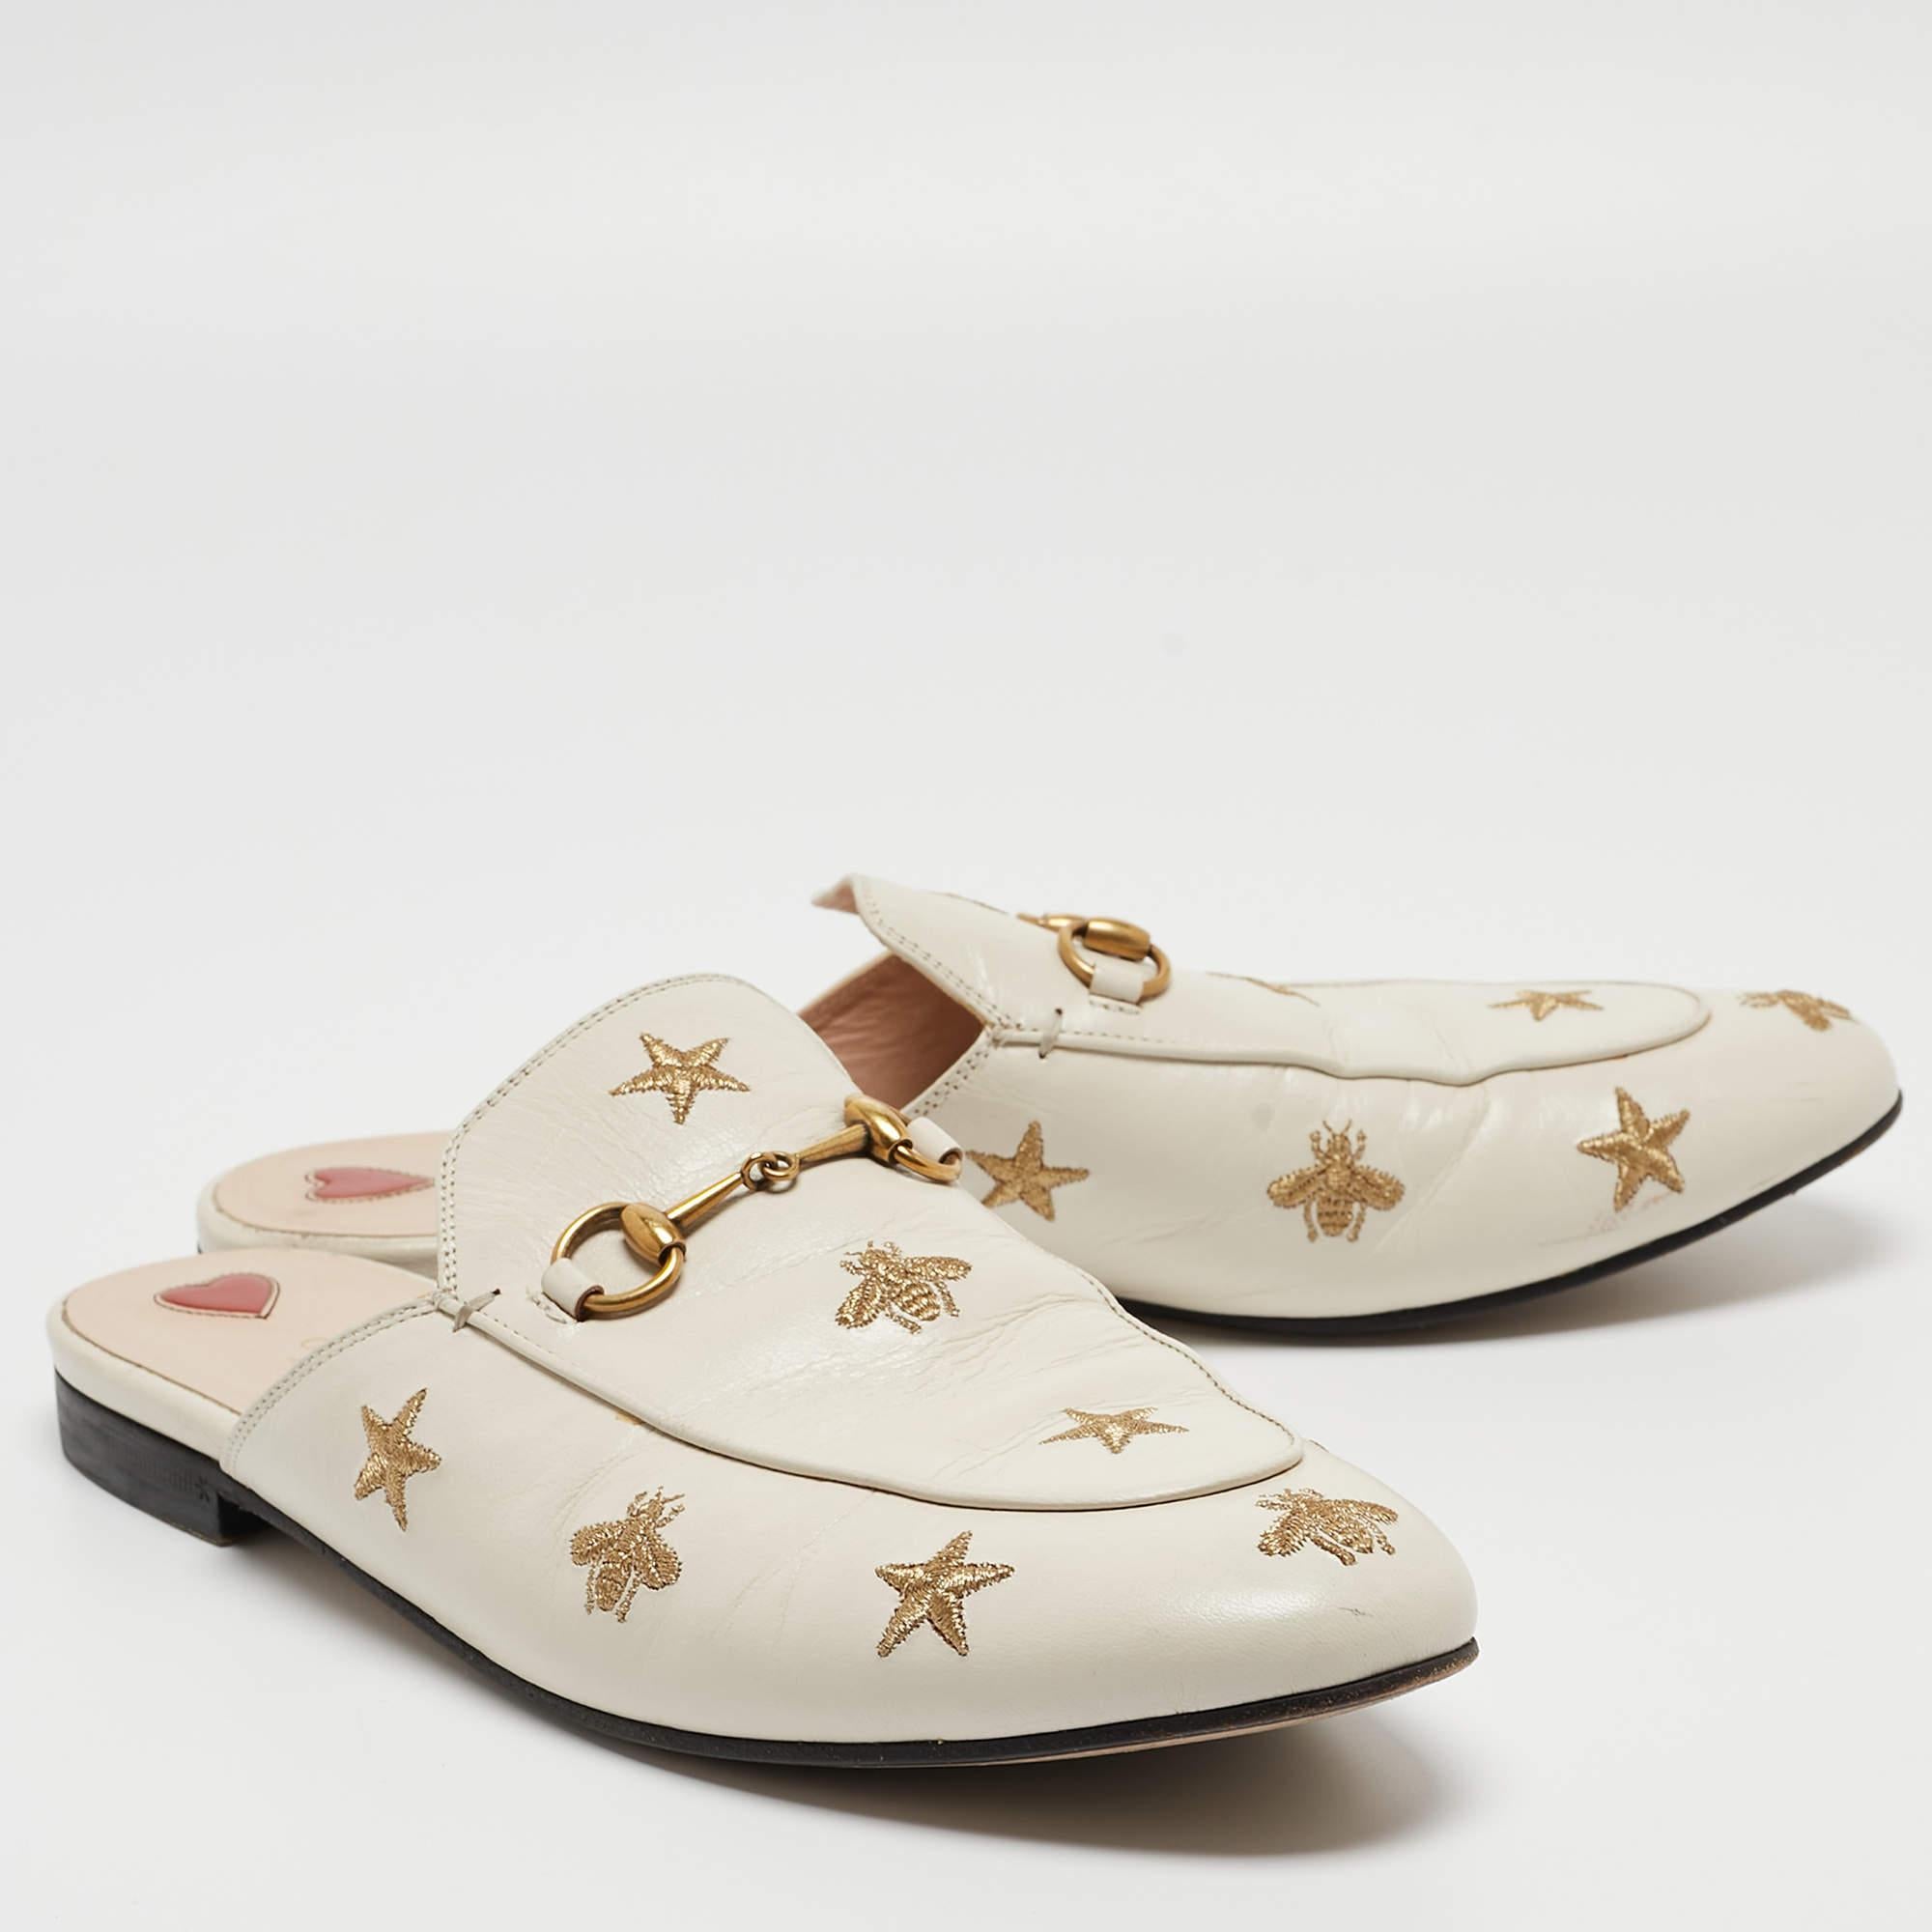 Gucci Cream Leather Bee and Star Embroidered Princetown Flat Mules Size 41.5 In Good Condition For Sale In Dubai, Al Qouz 2